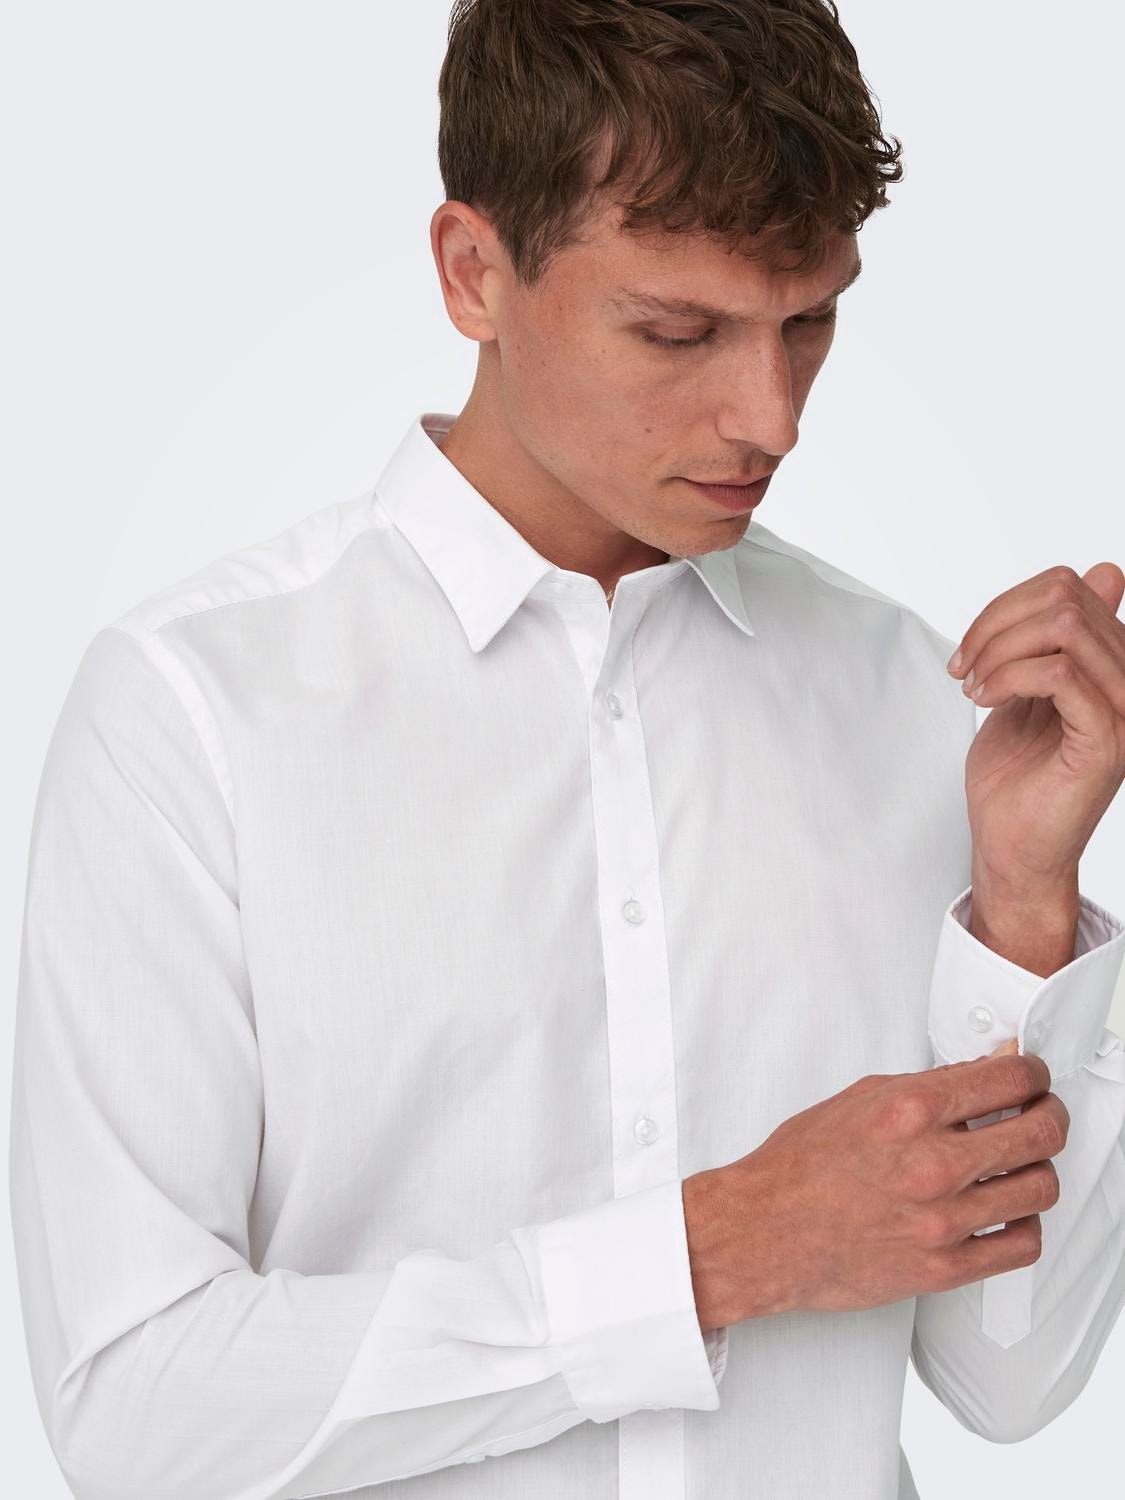 ONLY & SONS Classic shirt -White - 22015472